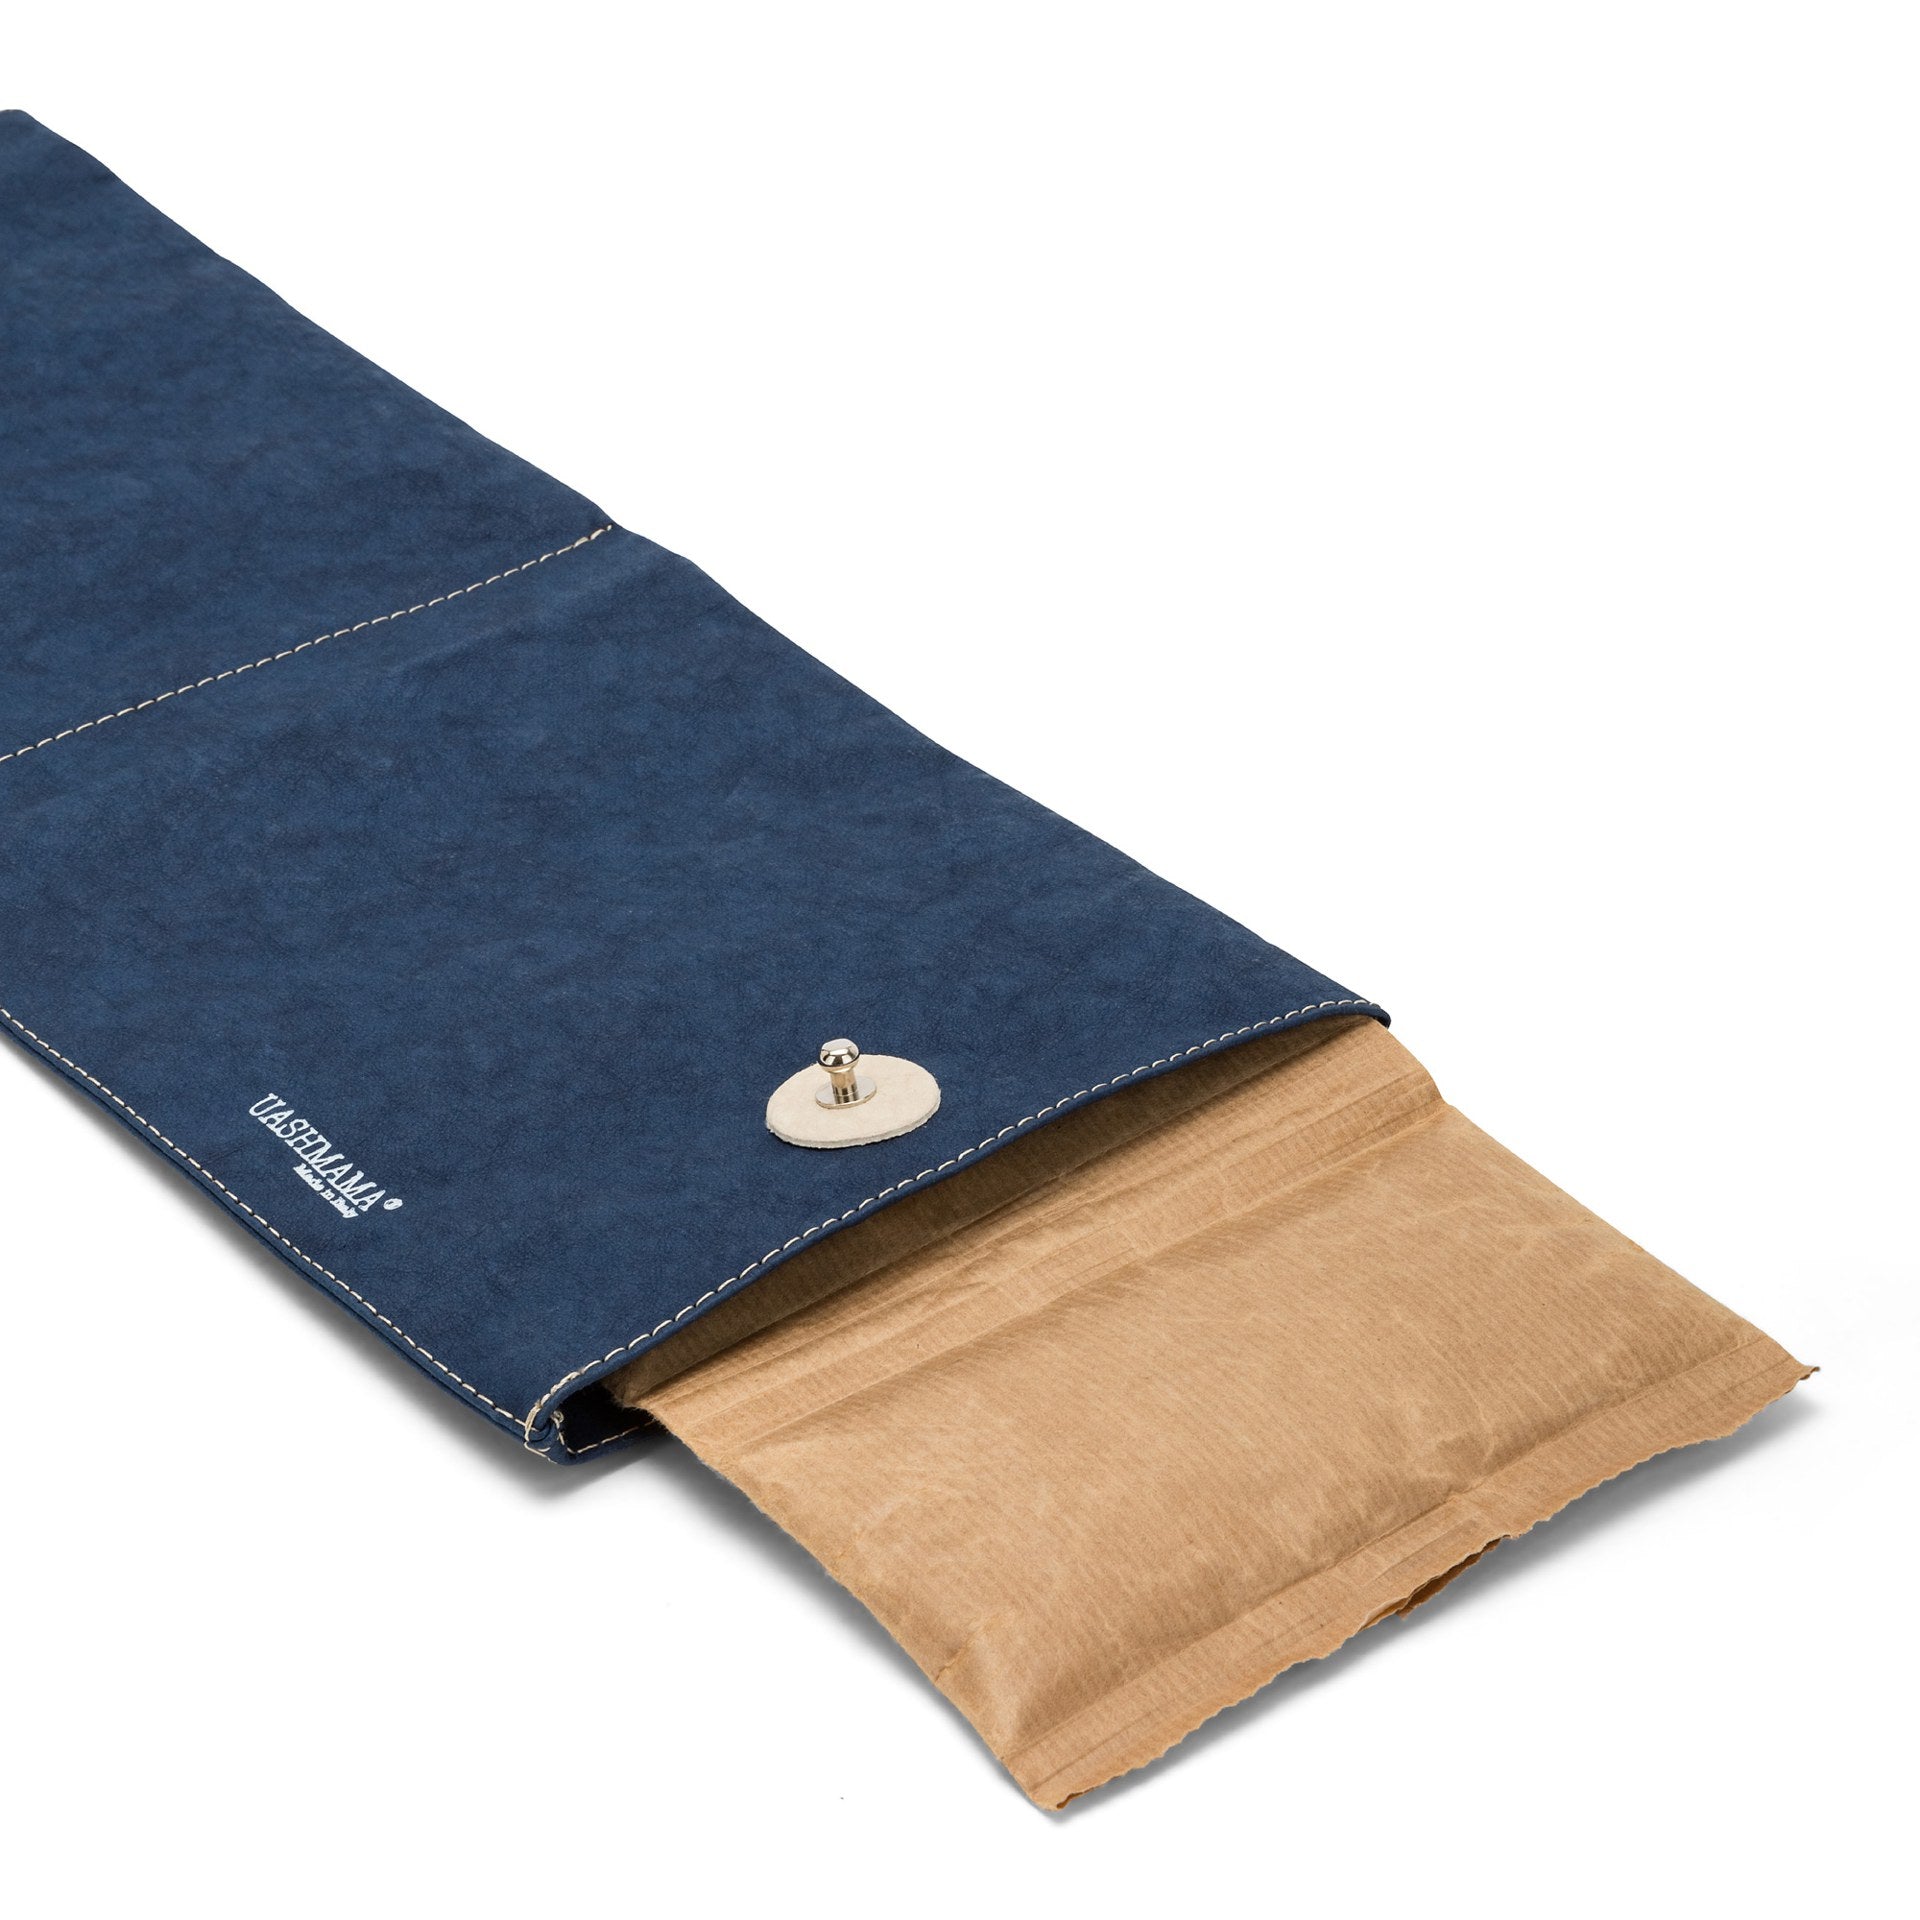 A navy washable paper wine cooler is shown lying flat and open. The freezer insert (brown paper outer) protrudes from one end.